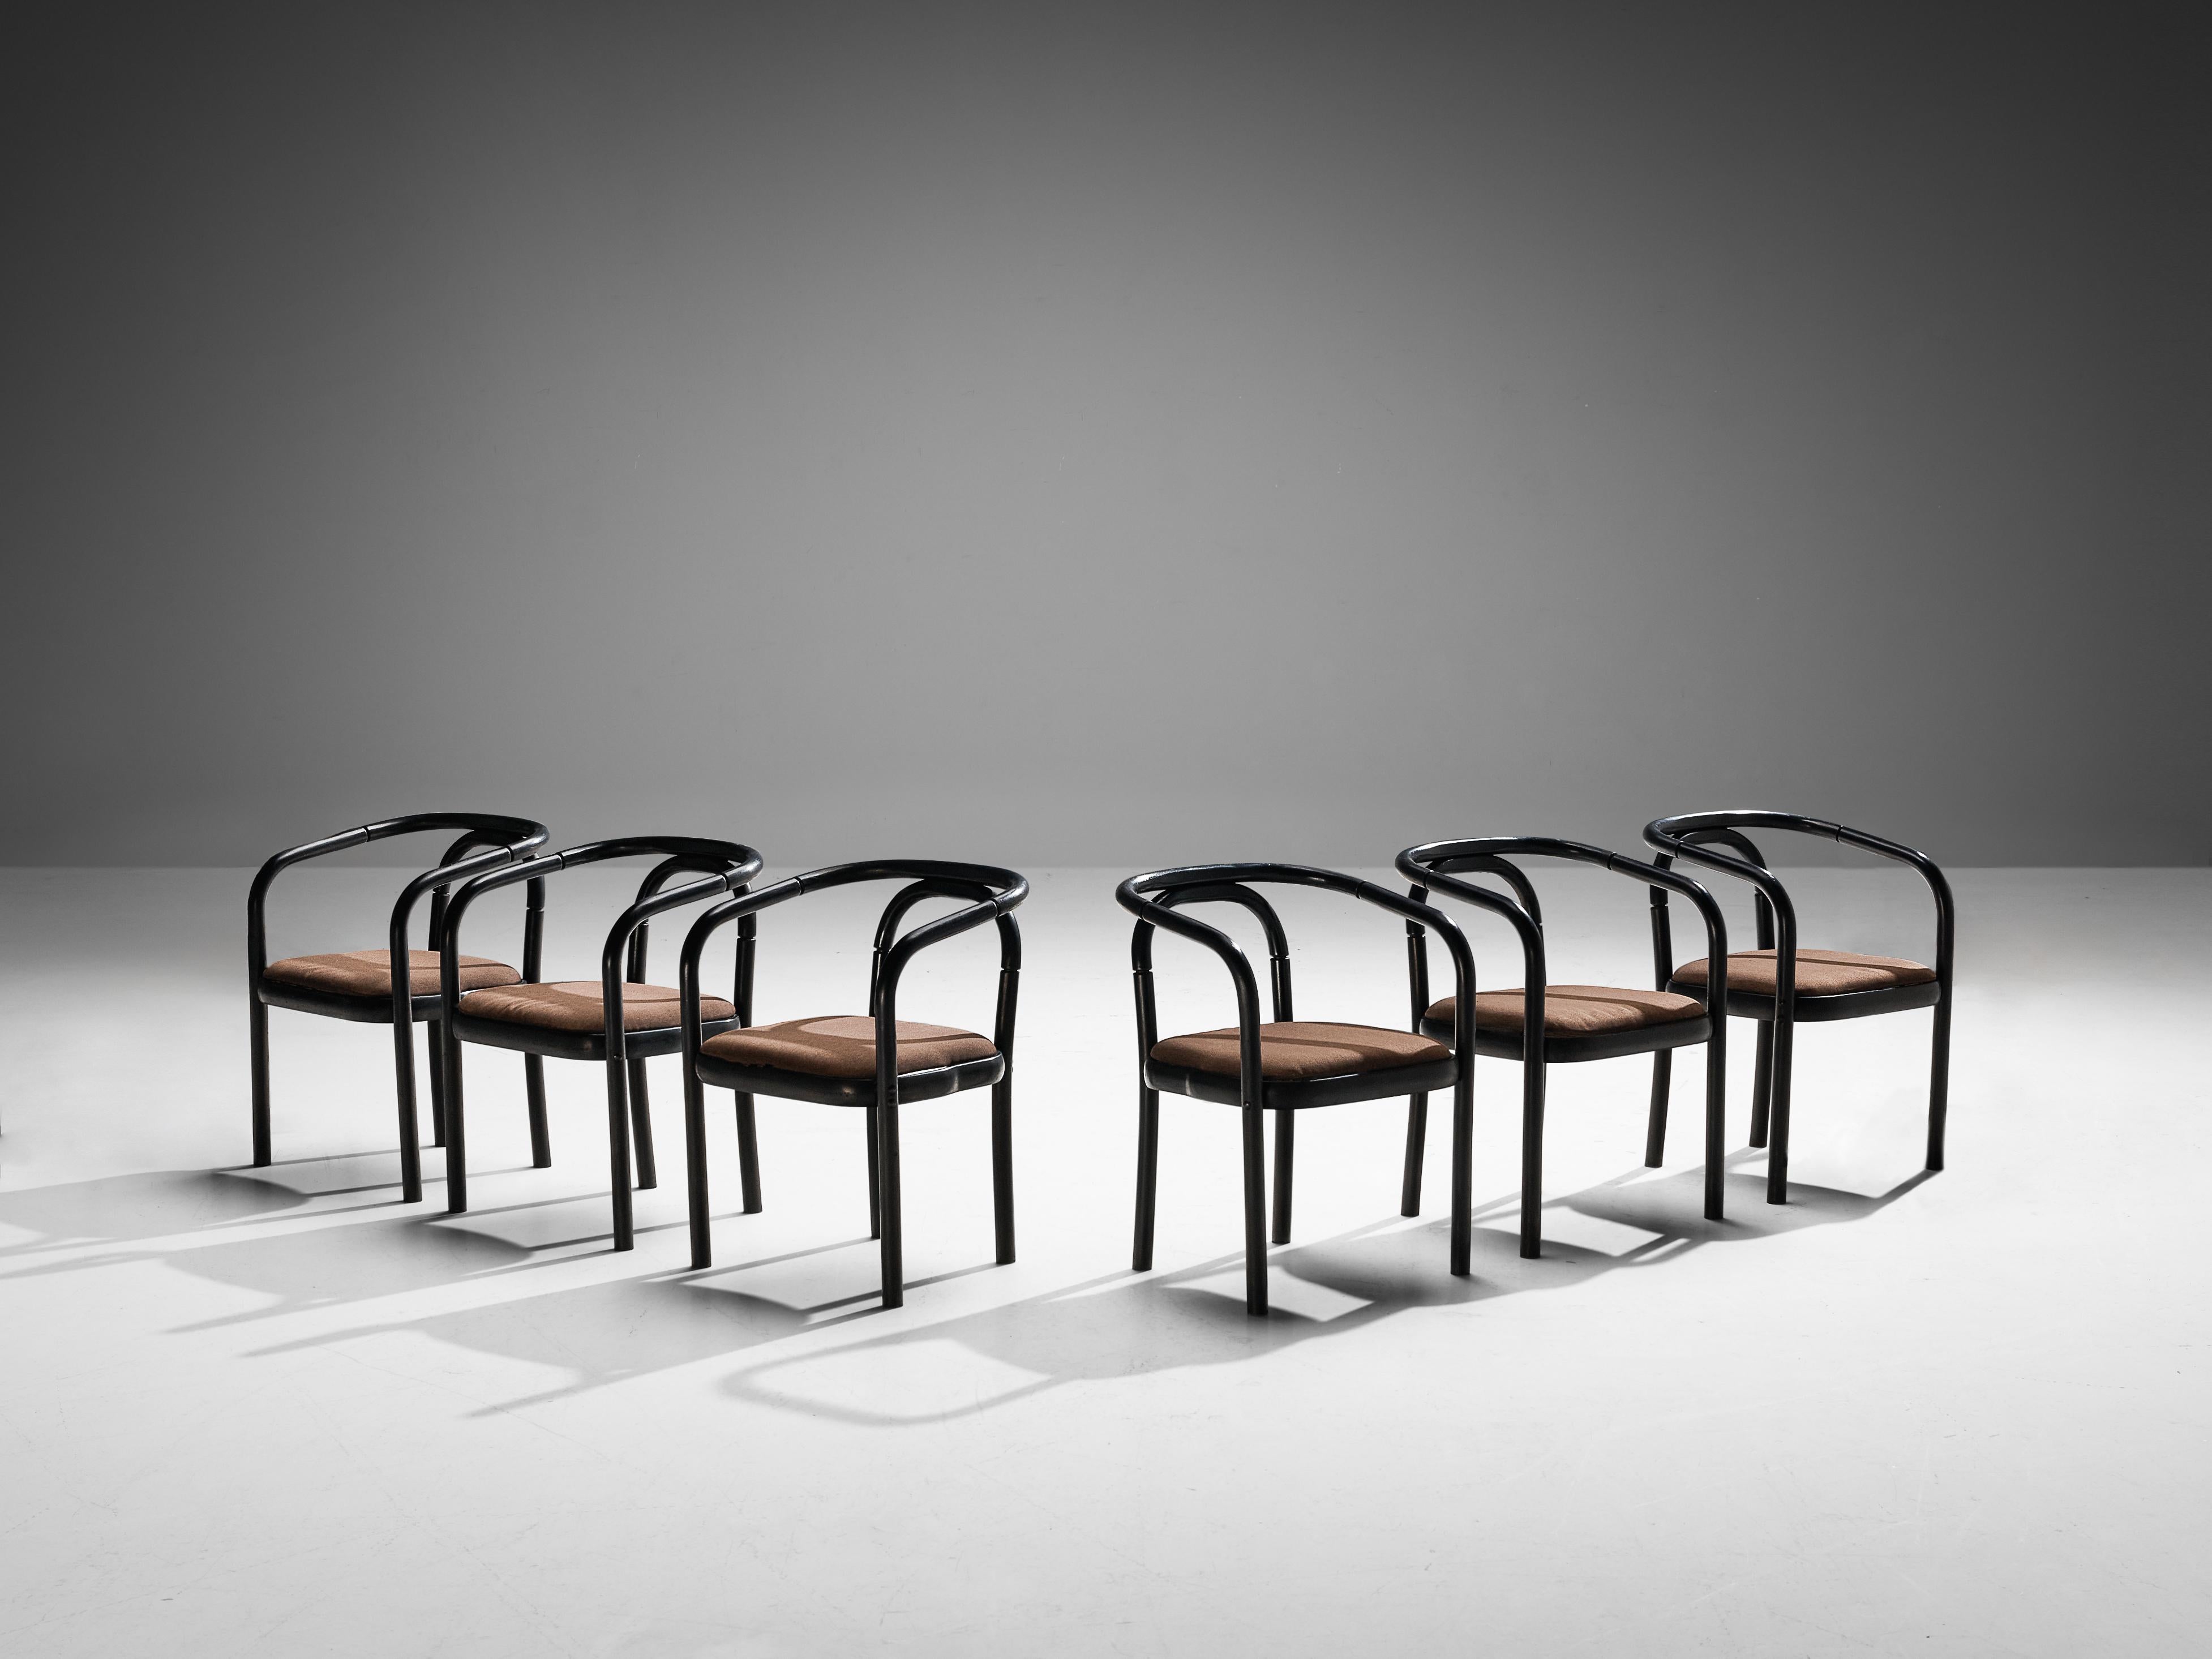 Antonin Suman for TON armchairs, model E4309, lacquered wood, fabric, Czech Republic, 1977

These chairs were designed by Antonin Suman and manufactured by TON. The design features a wonderful bentwood frame finished in black lacquer. Engraved rings